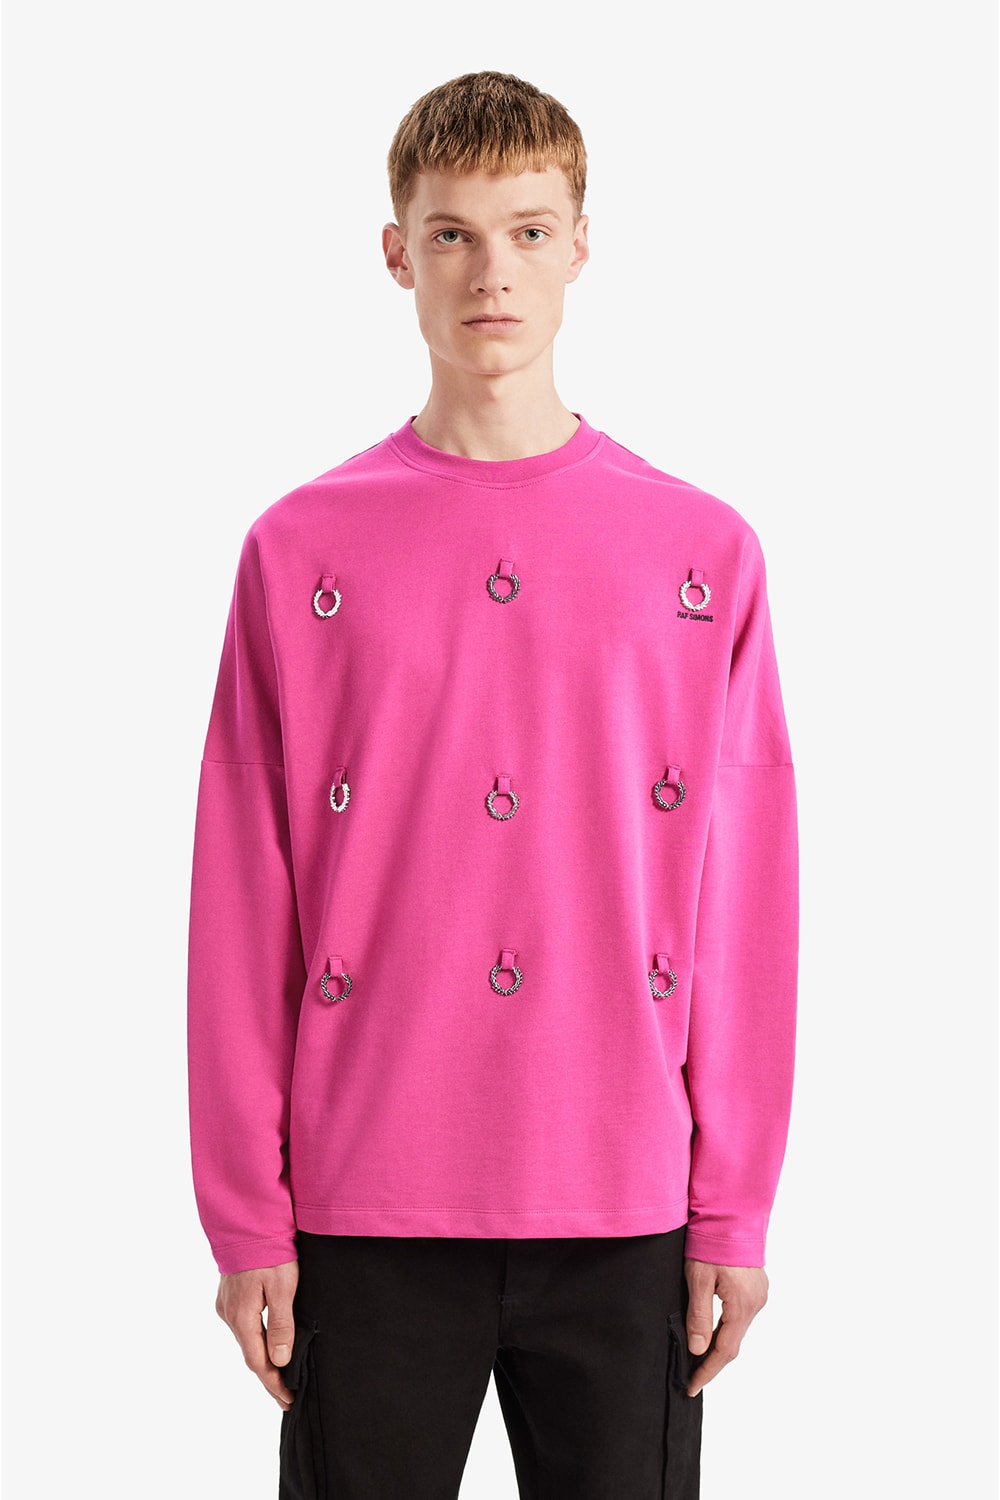 raf simons fred perry fall winter 2019 release information details buy cop purchase collection george plember gavin watson